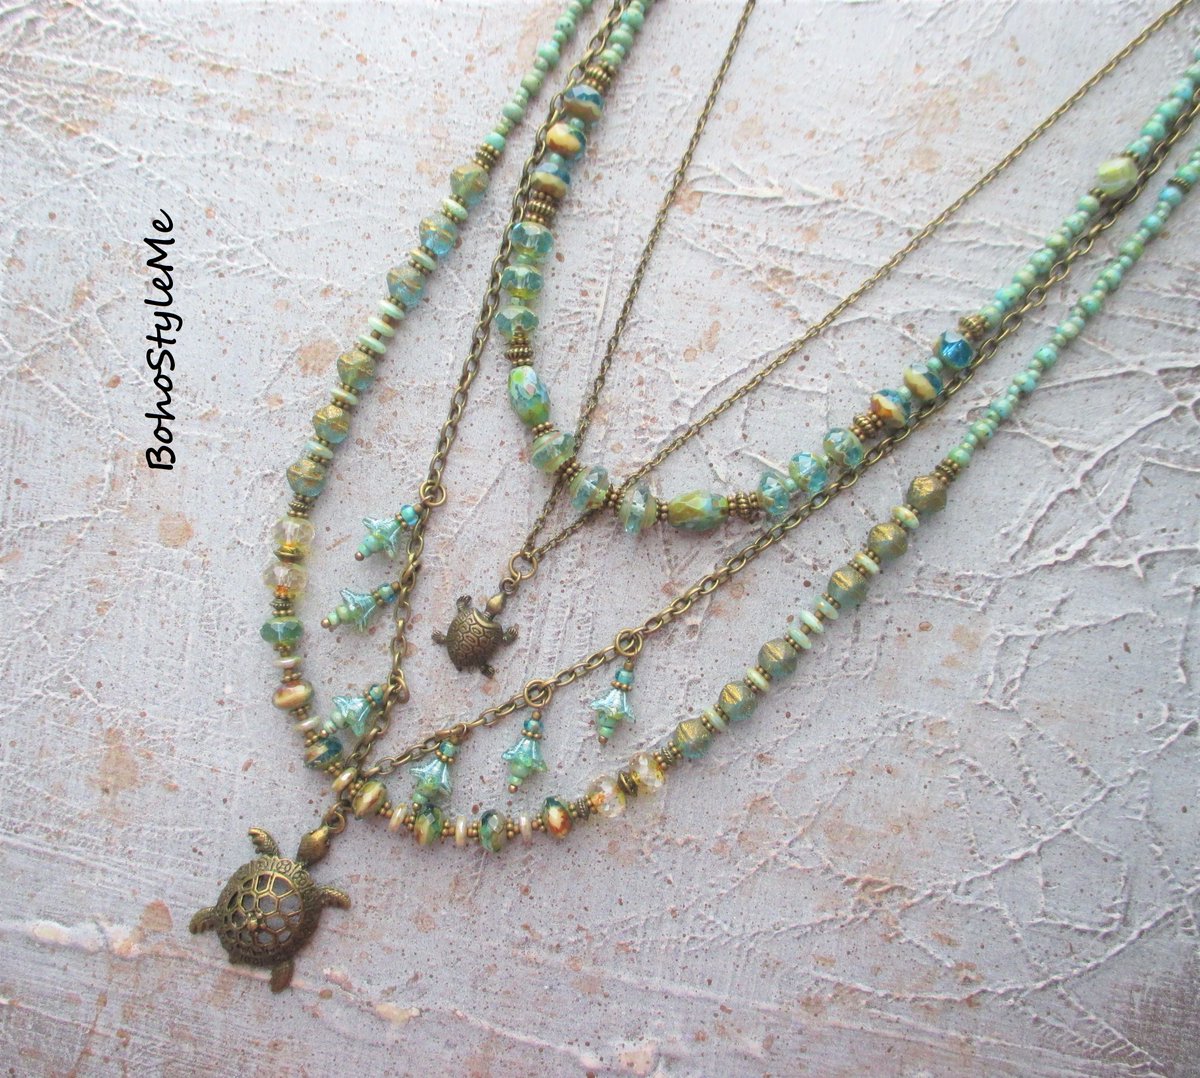 Turtle Beach, Boho Style Me Blue Green Beaded Layering Necklace, Ocean Nature Inspired Handmade Necklace, BohoStyleMe